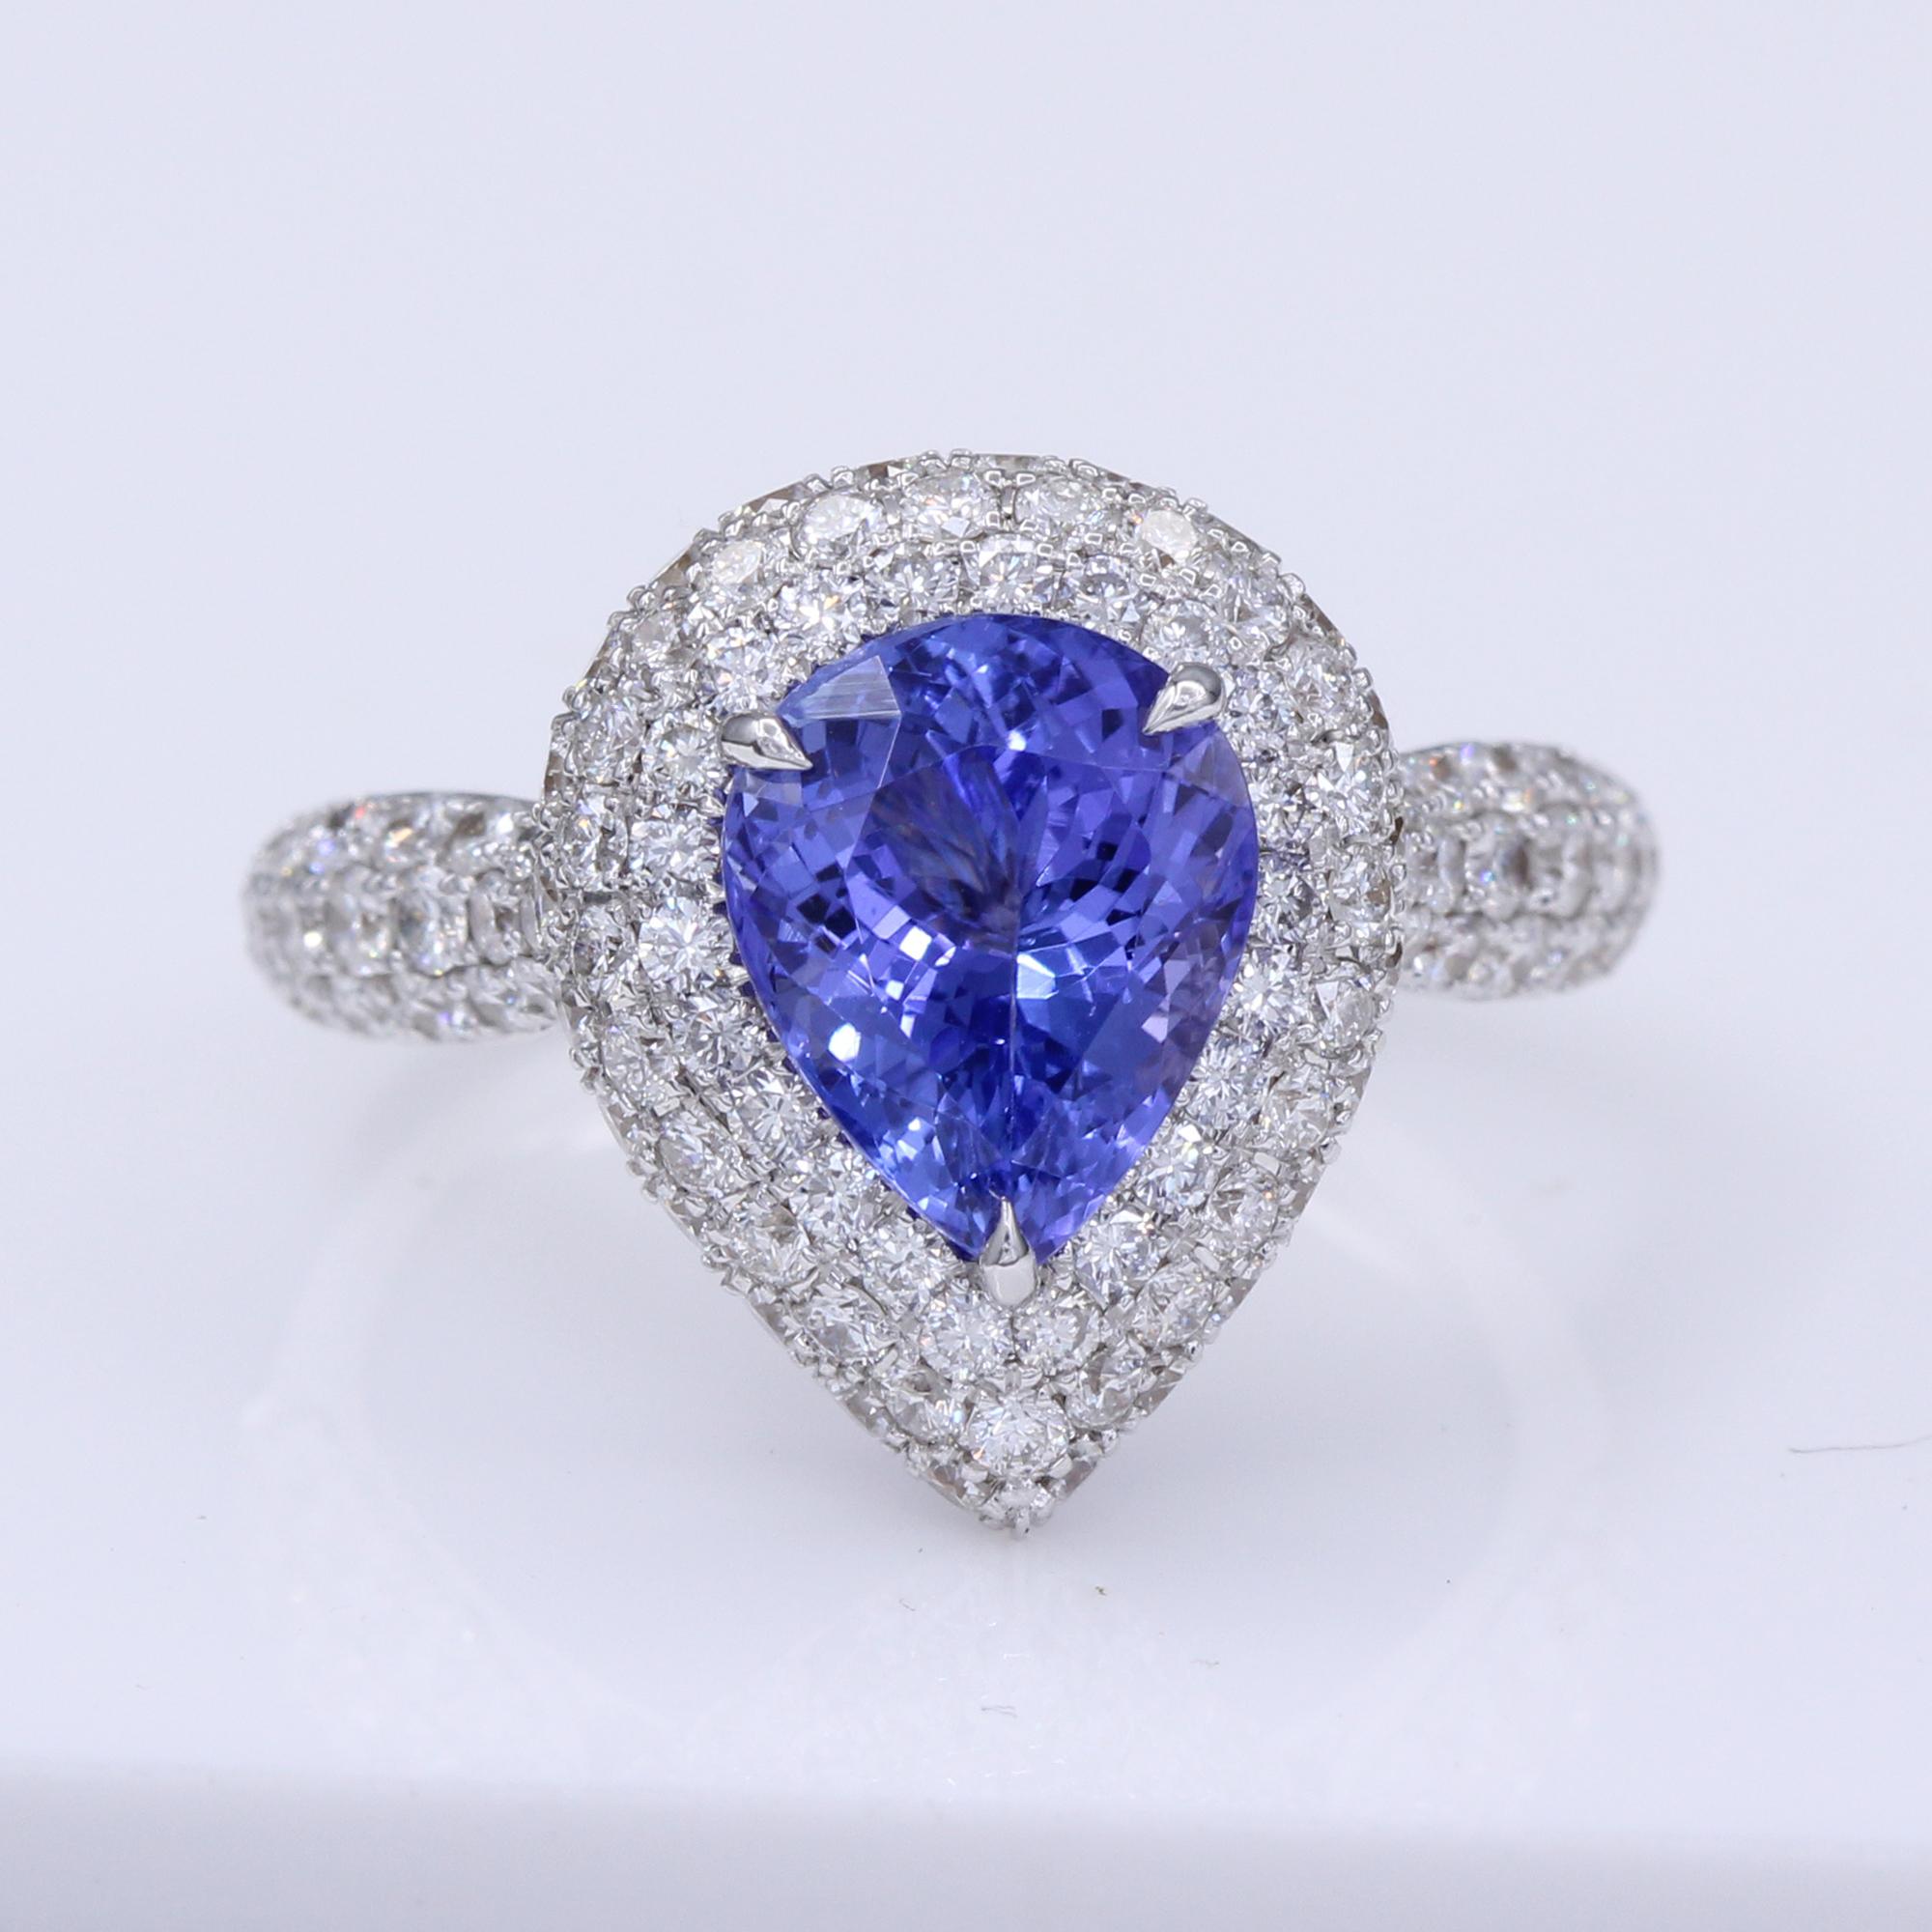 Pear Shape Tanzanite 3.28 Carat Diamond Ring 18 Karat White Gold In New Condition For Sale In Brooklyn, NY